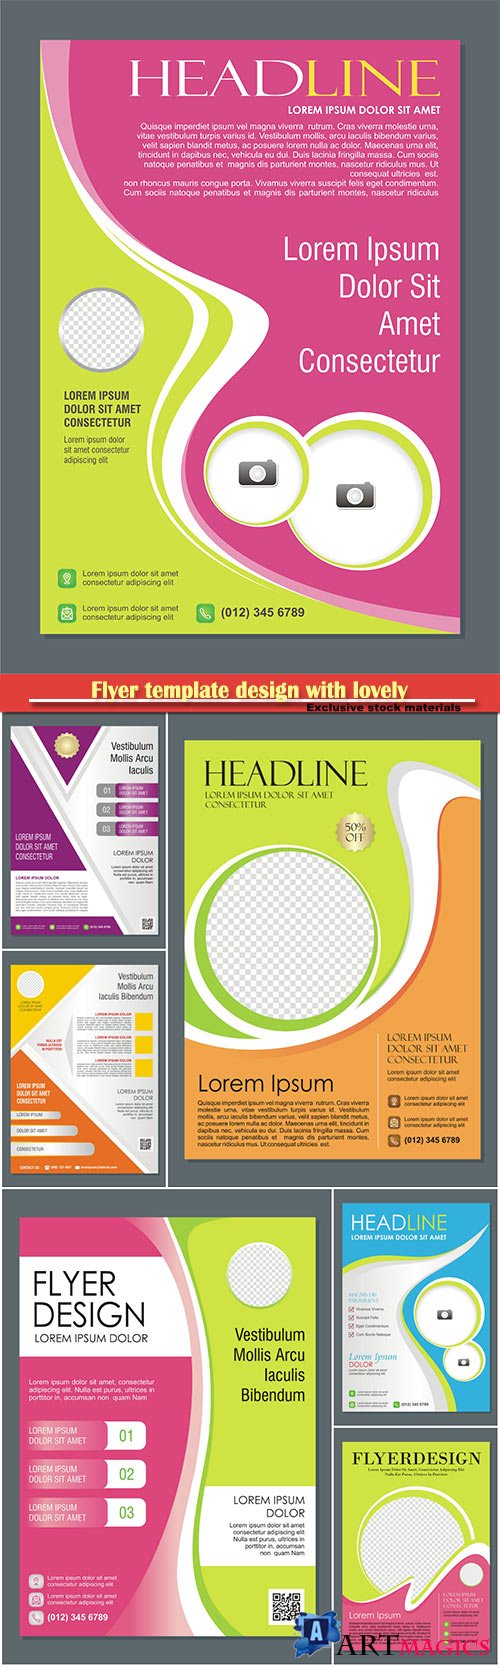 Flyer template design with lovely and stylish design